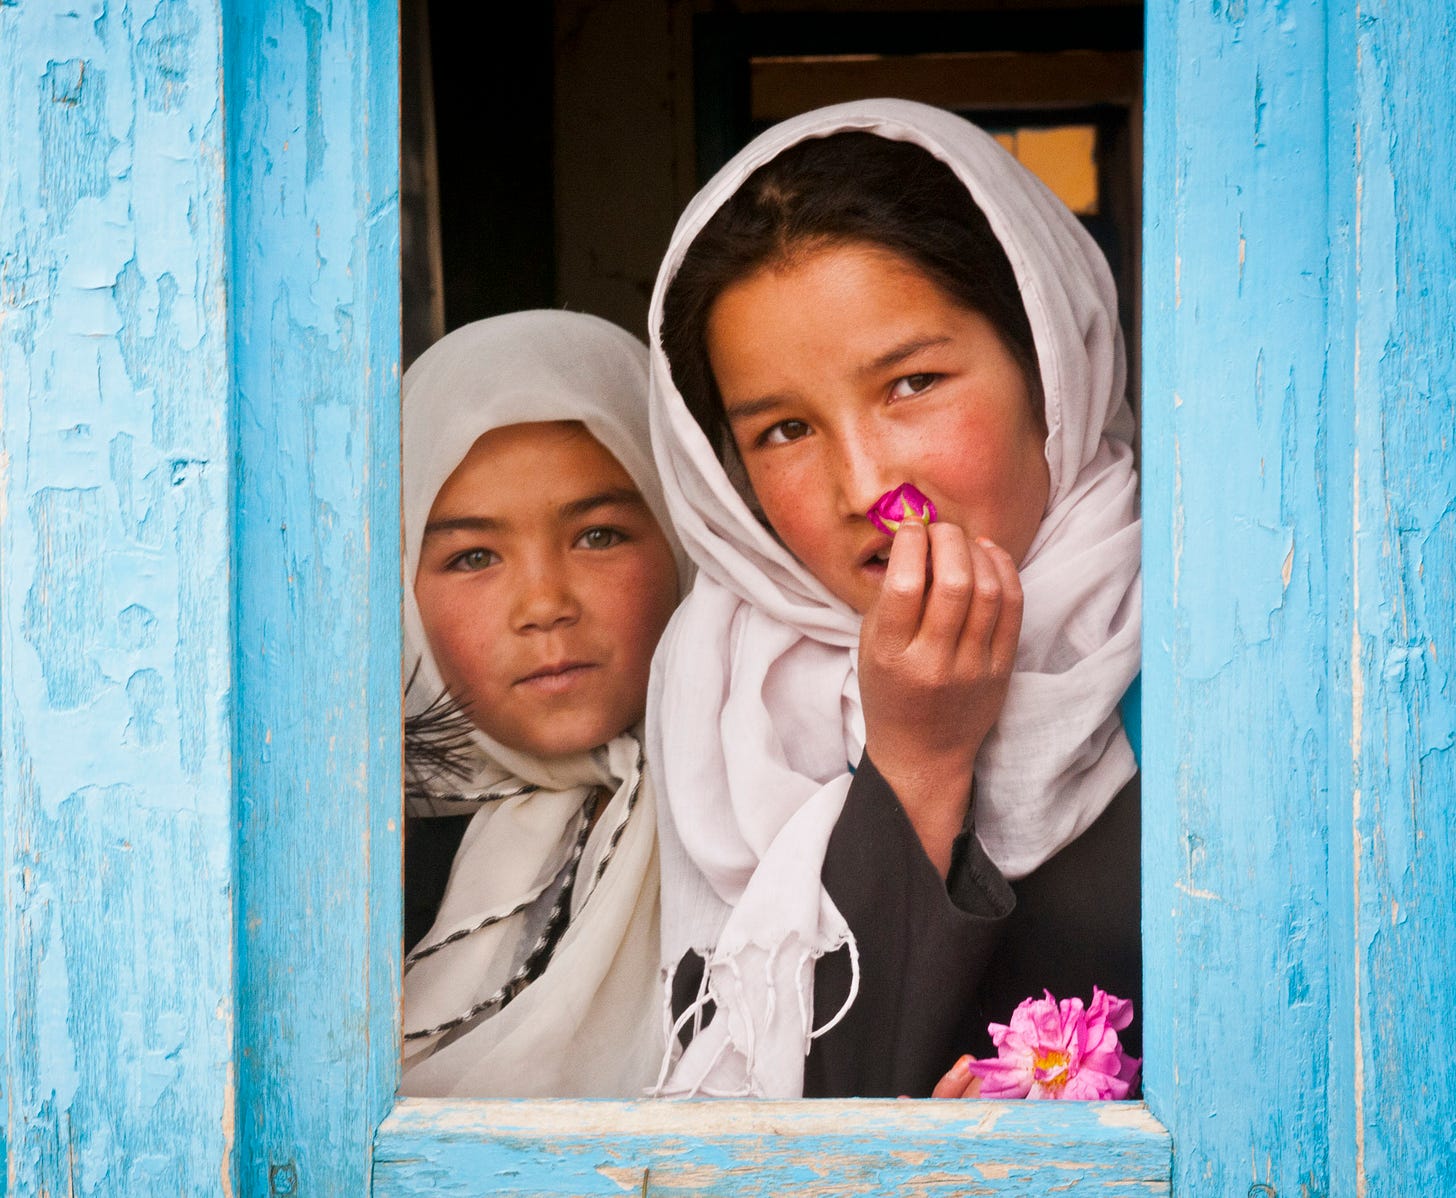 Picture of two Hazara girls in Bamiyan, Afghanistan